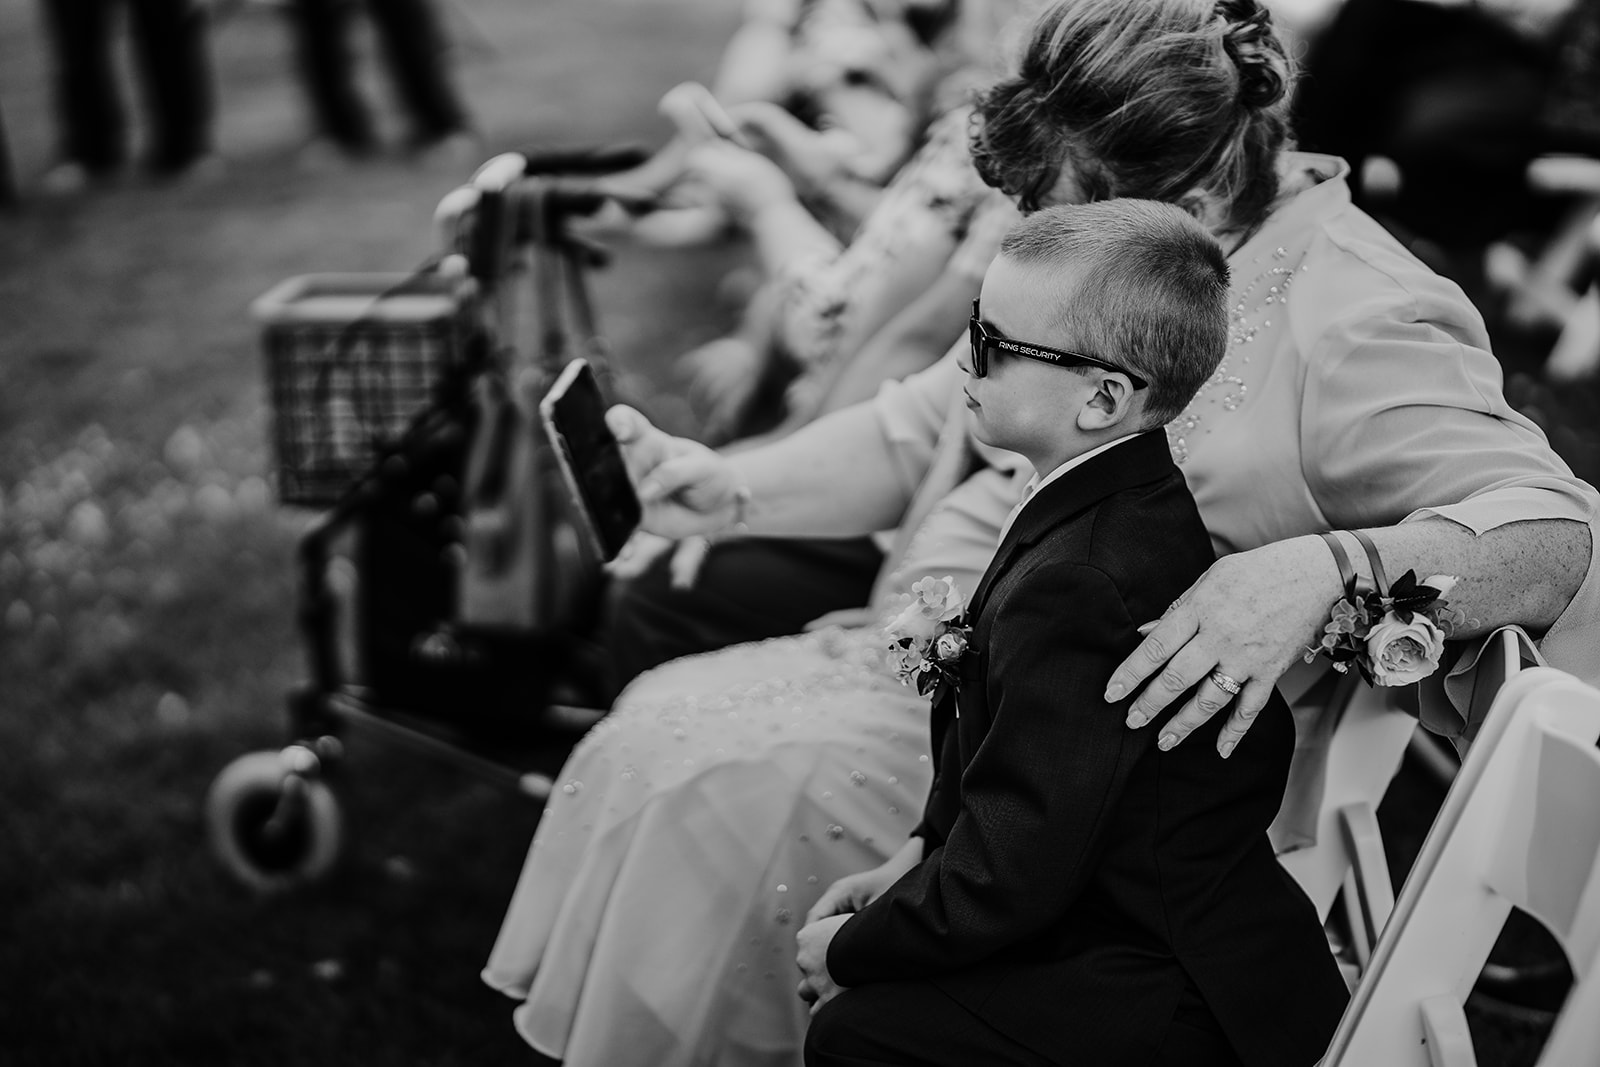 Wedding guests look at the program as they wait for the Wisconsin wedding ceremony to begin. Black and white wedding photos Wedding guest photos #wisconsinweddingphotographer #choosingaphotographer #lakesidewedding #waterfrontweddingceremony